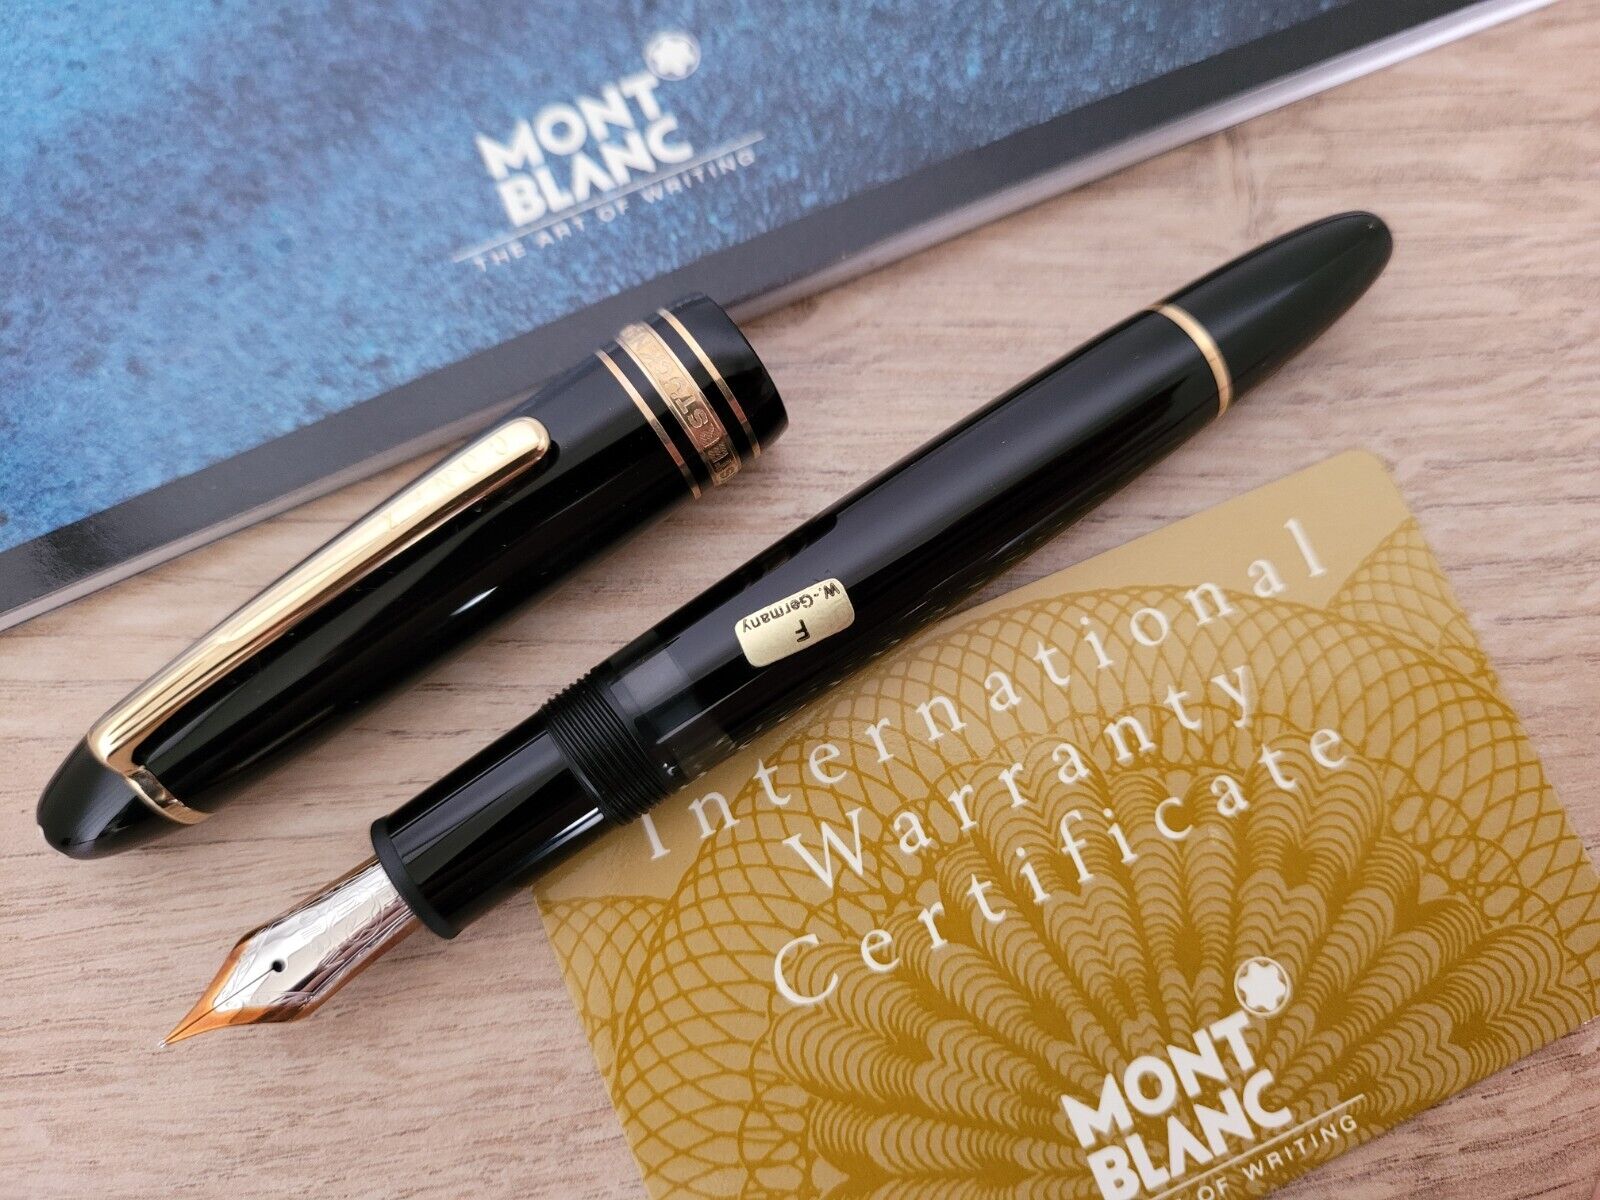 Vintage MONTBLANC 146 Legrand Fountain Pen Made in W.Germany - NOS w/Box &Papers